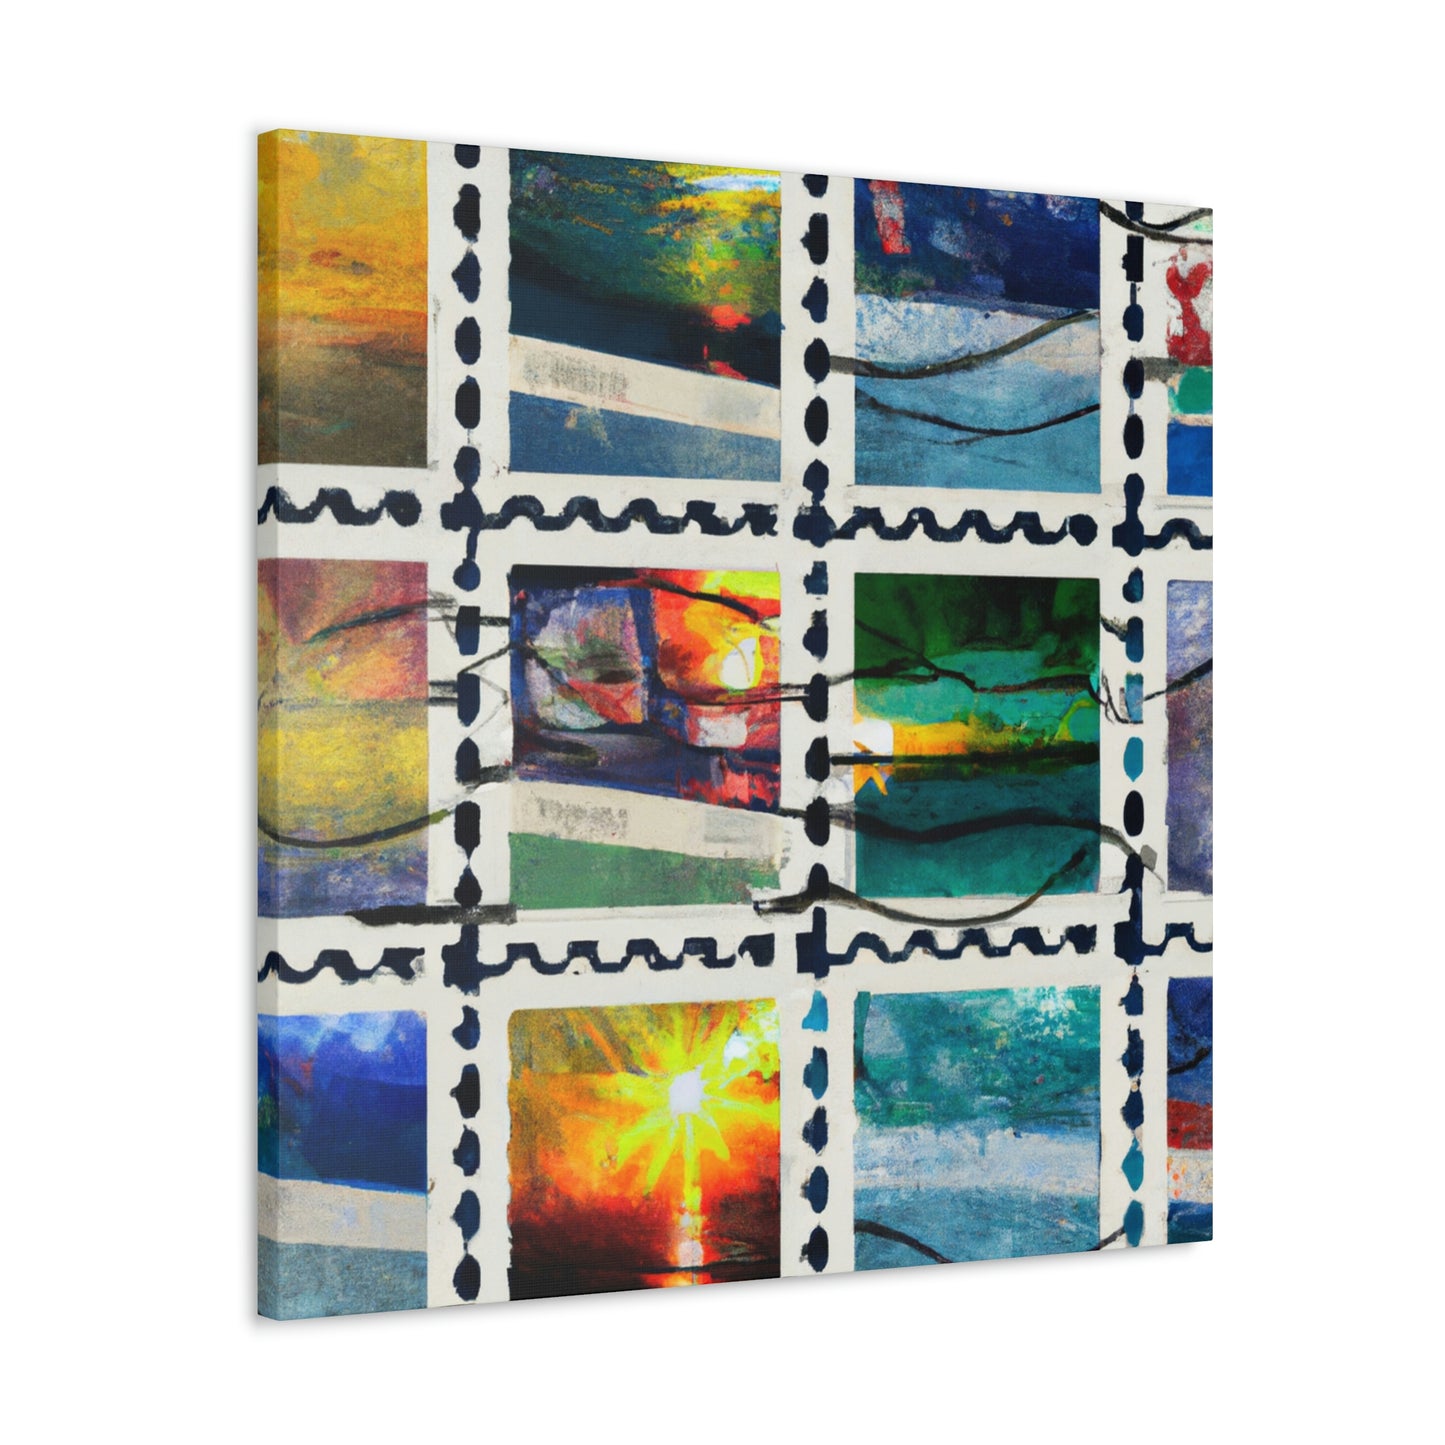 Global Postal Pride Stamps - Postage Stamp Collector Canvas Wall Art